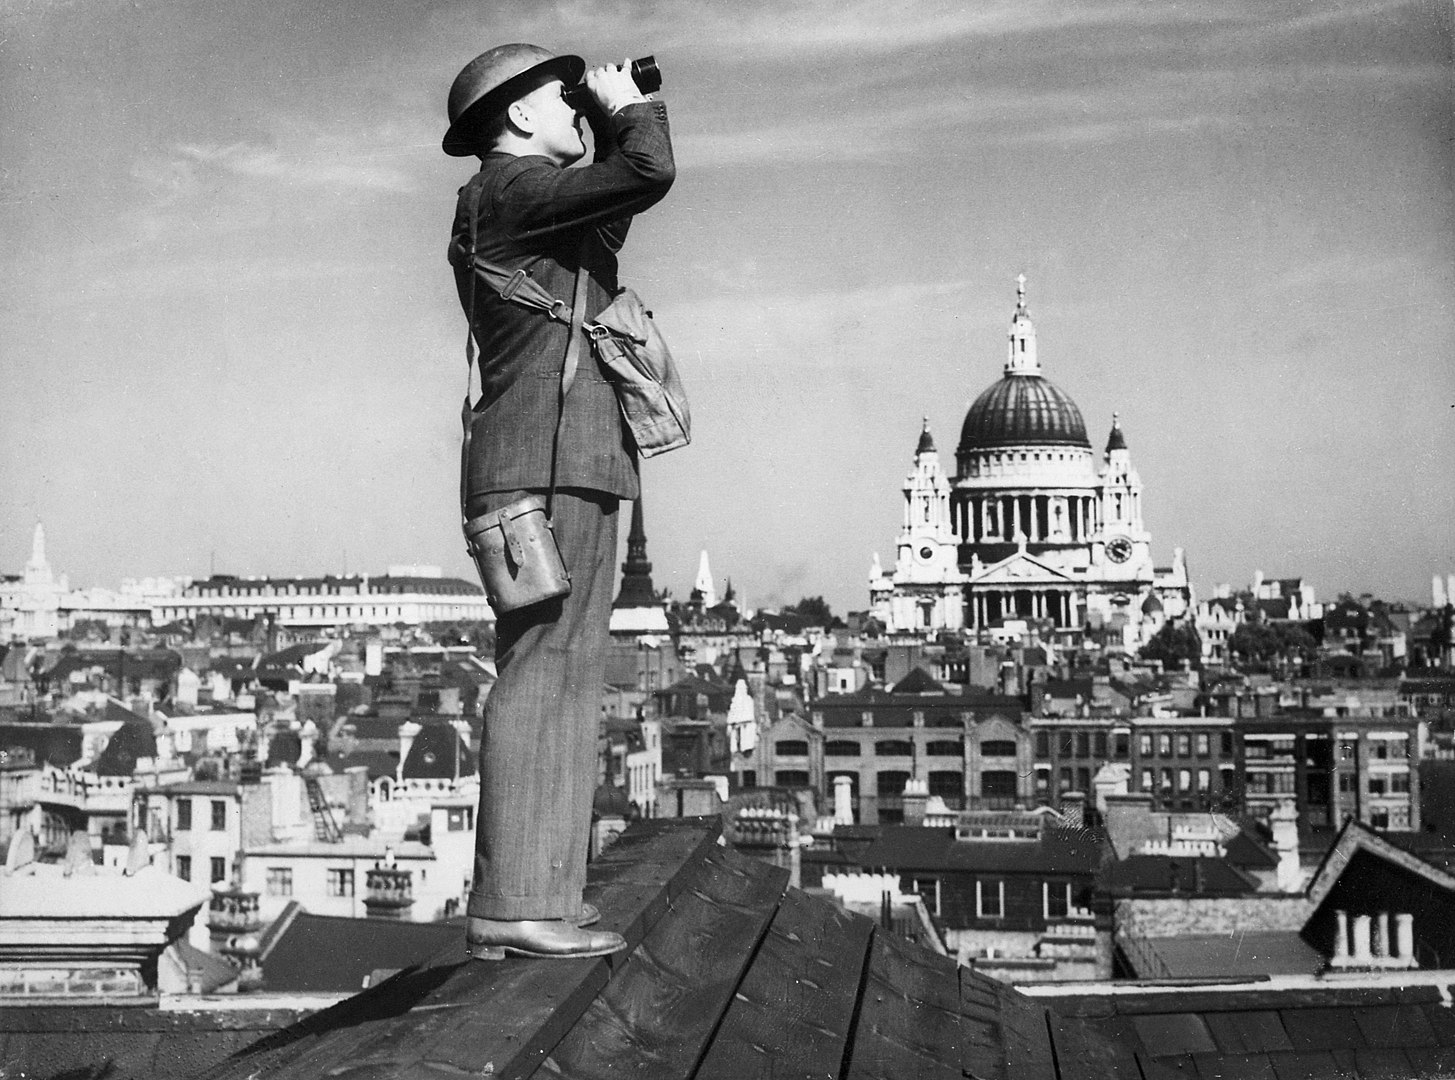 WW2 Facts, British Observing during the Battle of Britain